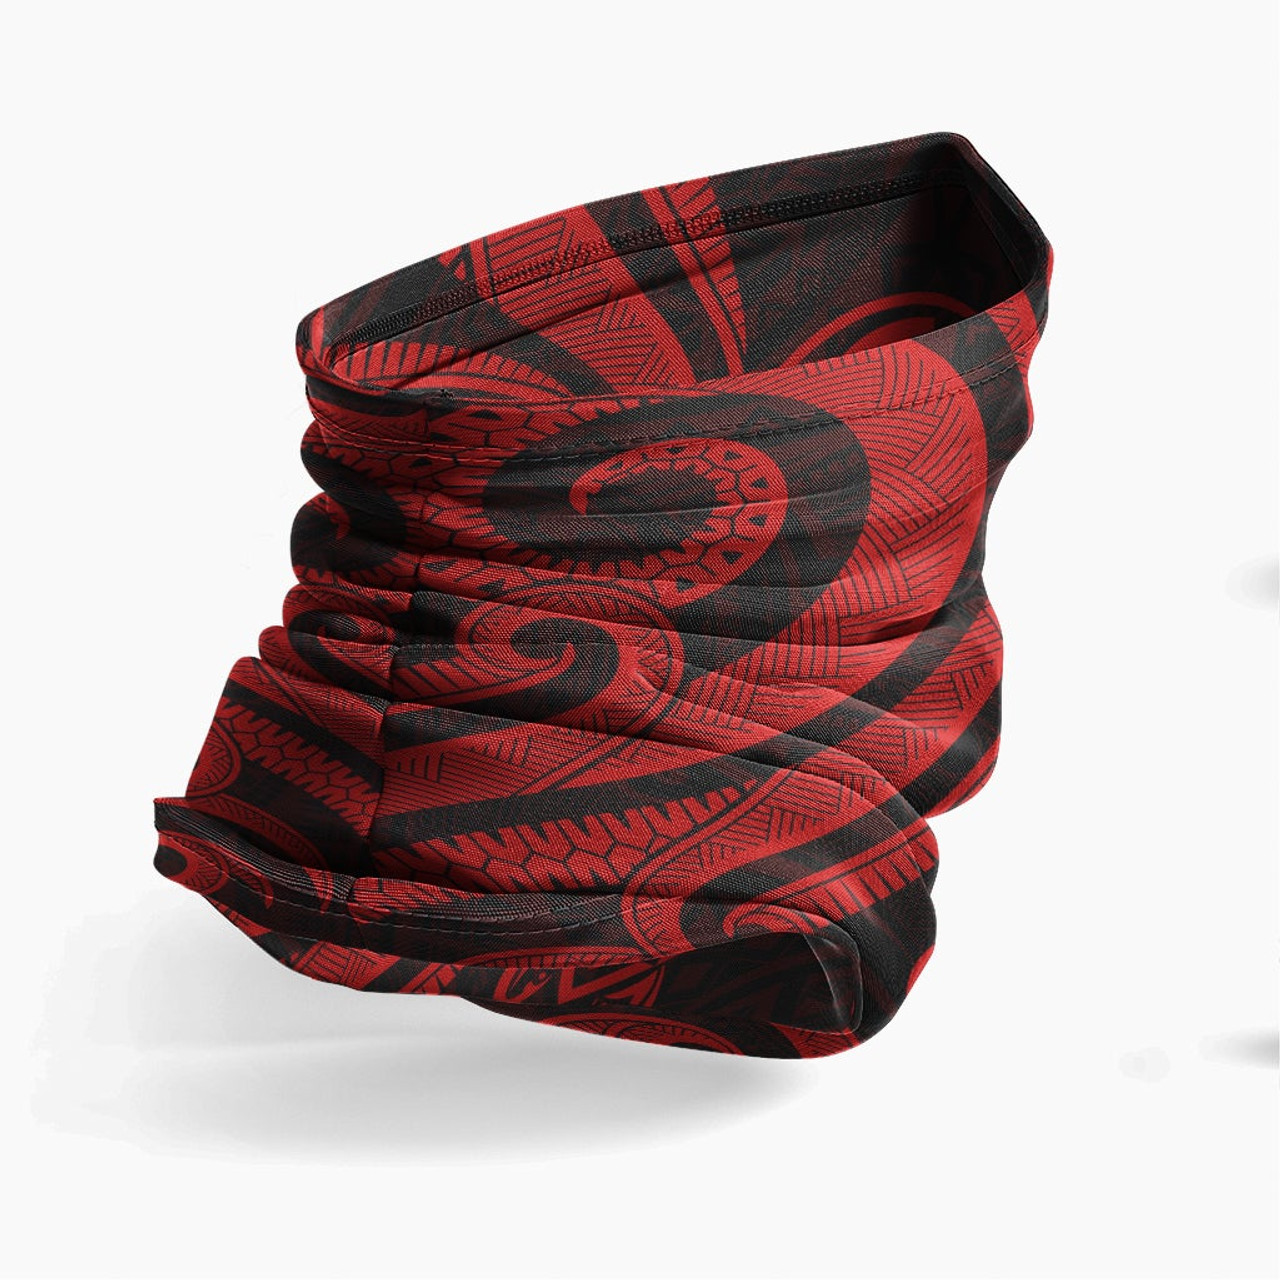 Yap Neck Gaiter - Turtle Tentacle Red 3